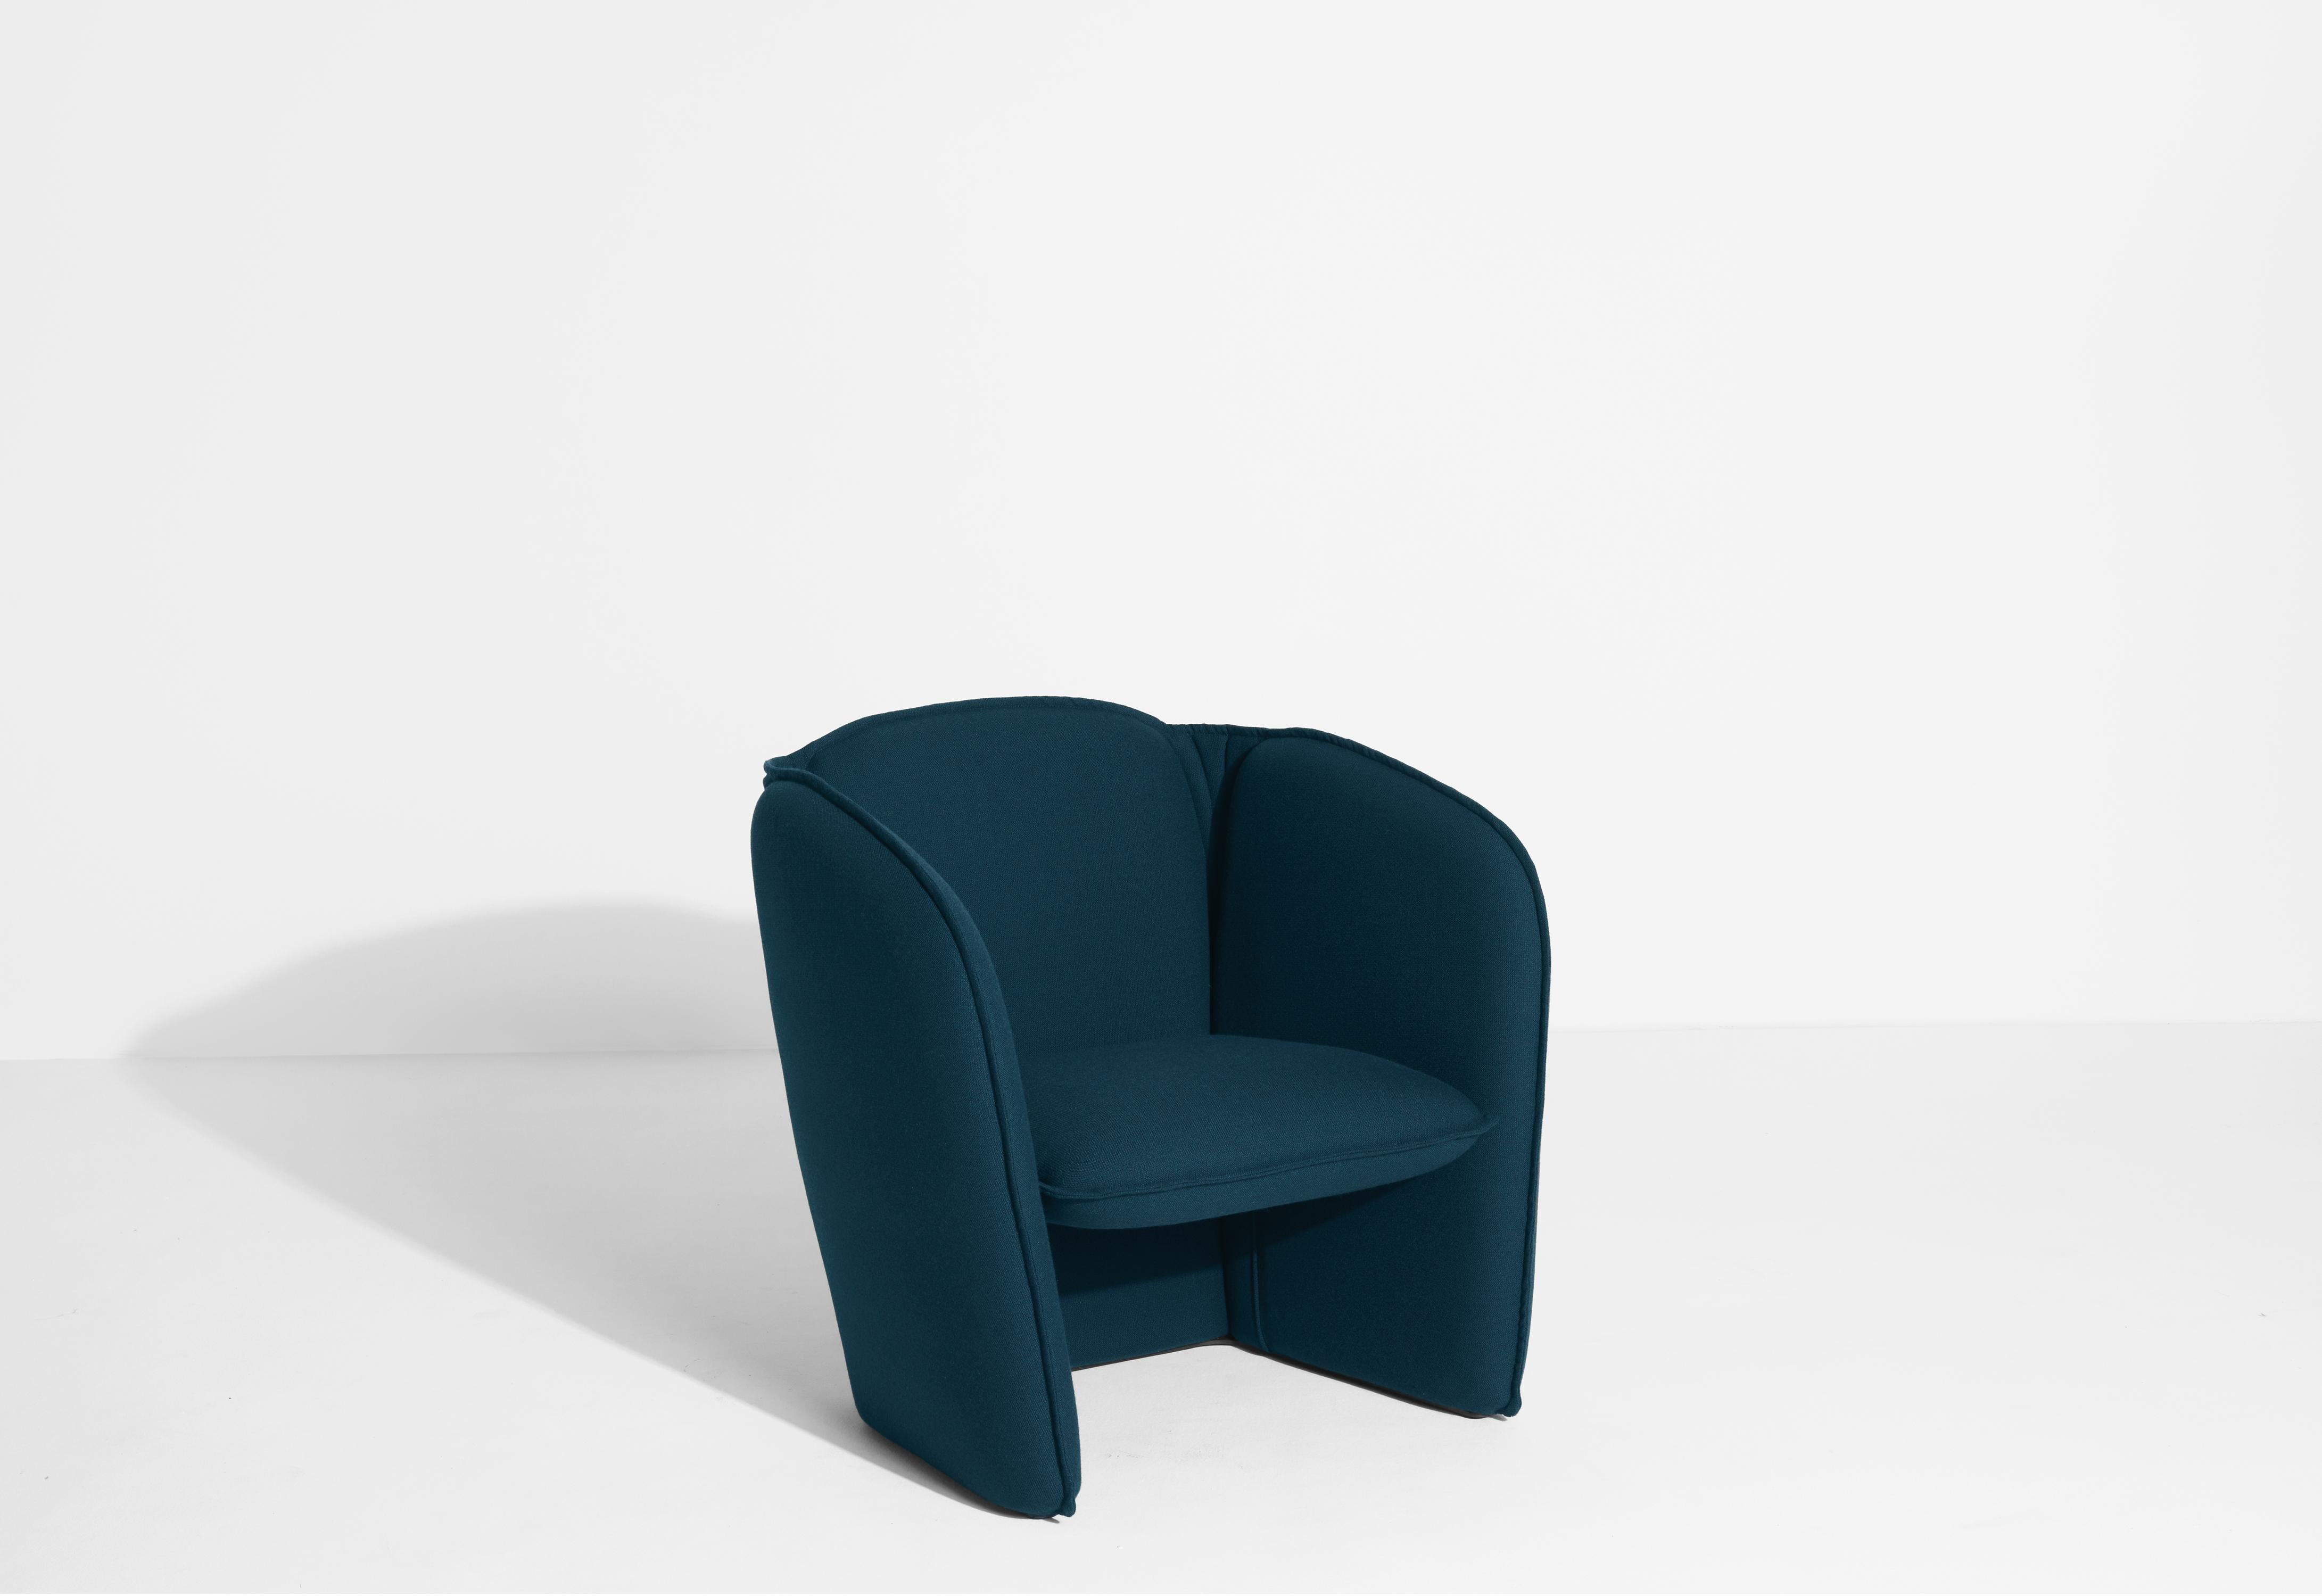 Contemporary Petite Friture Lily Armchair in Navy Blue by Färg & Blanche, 2022 For Sale